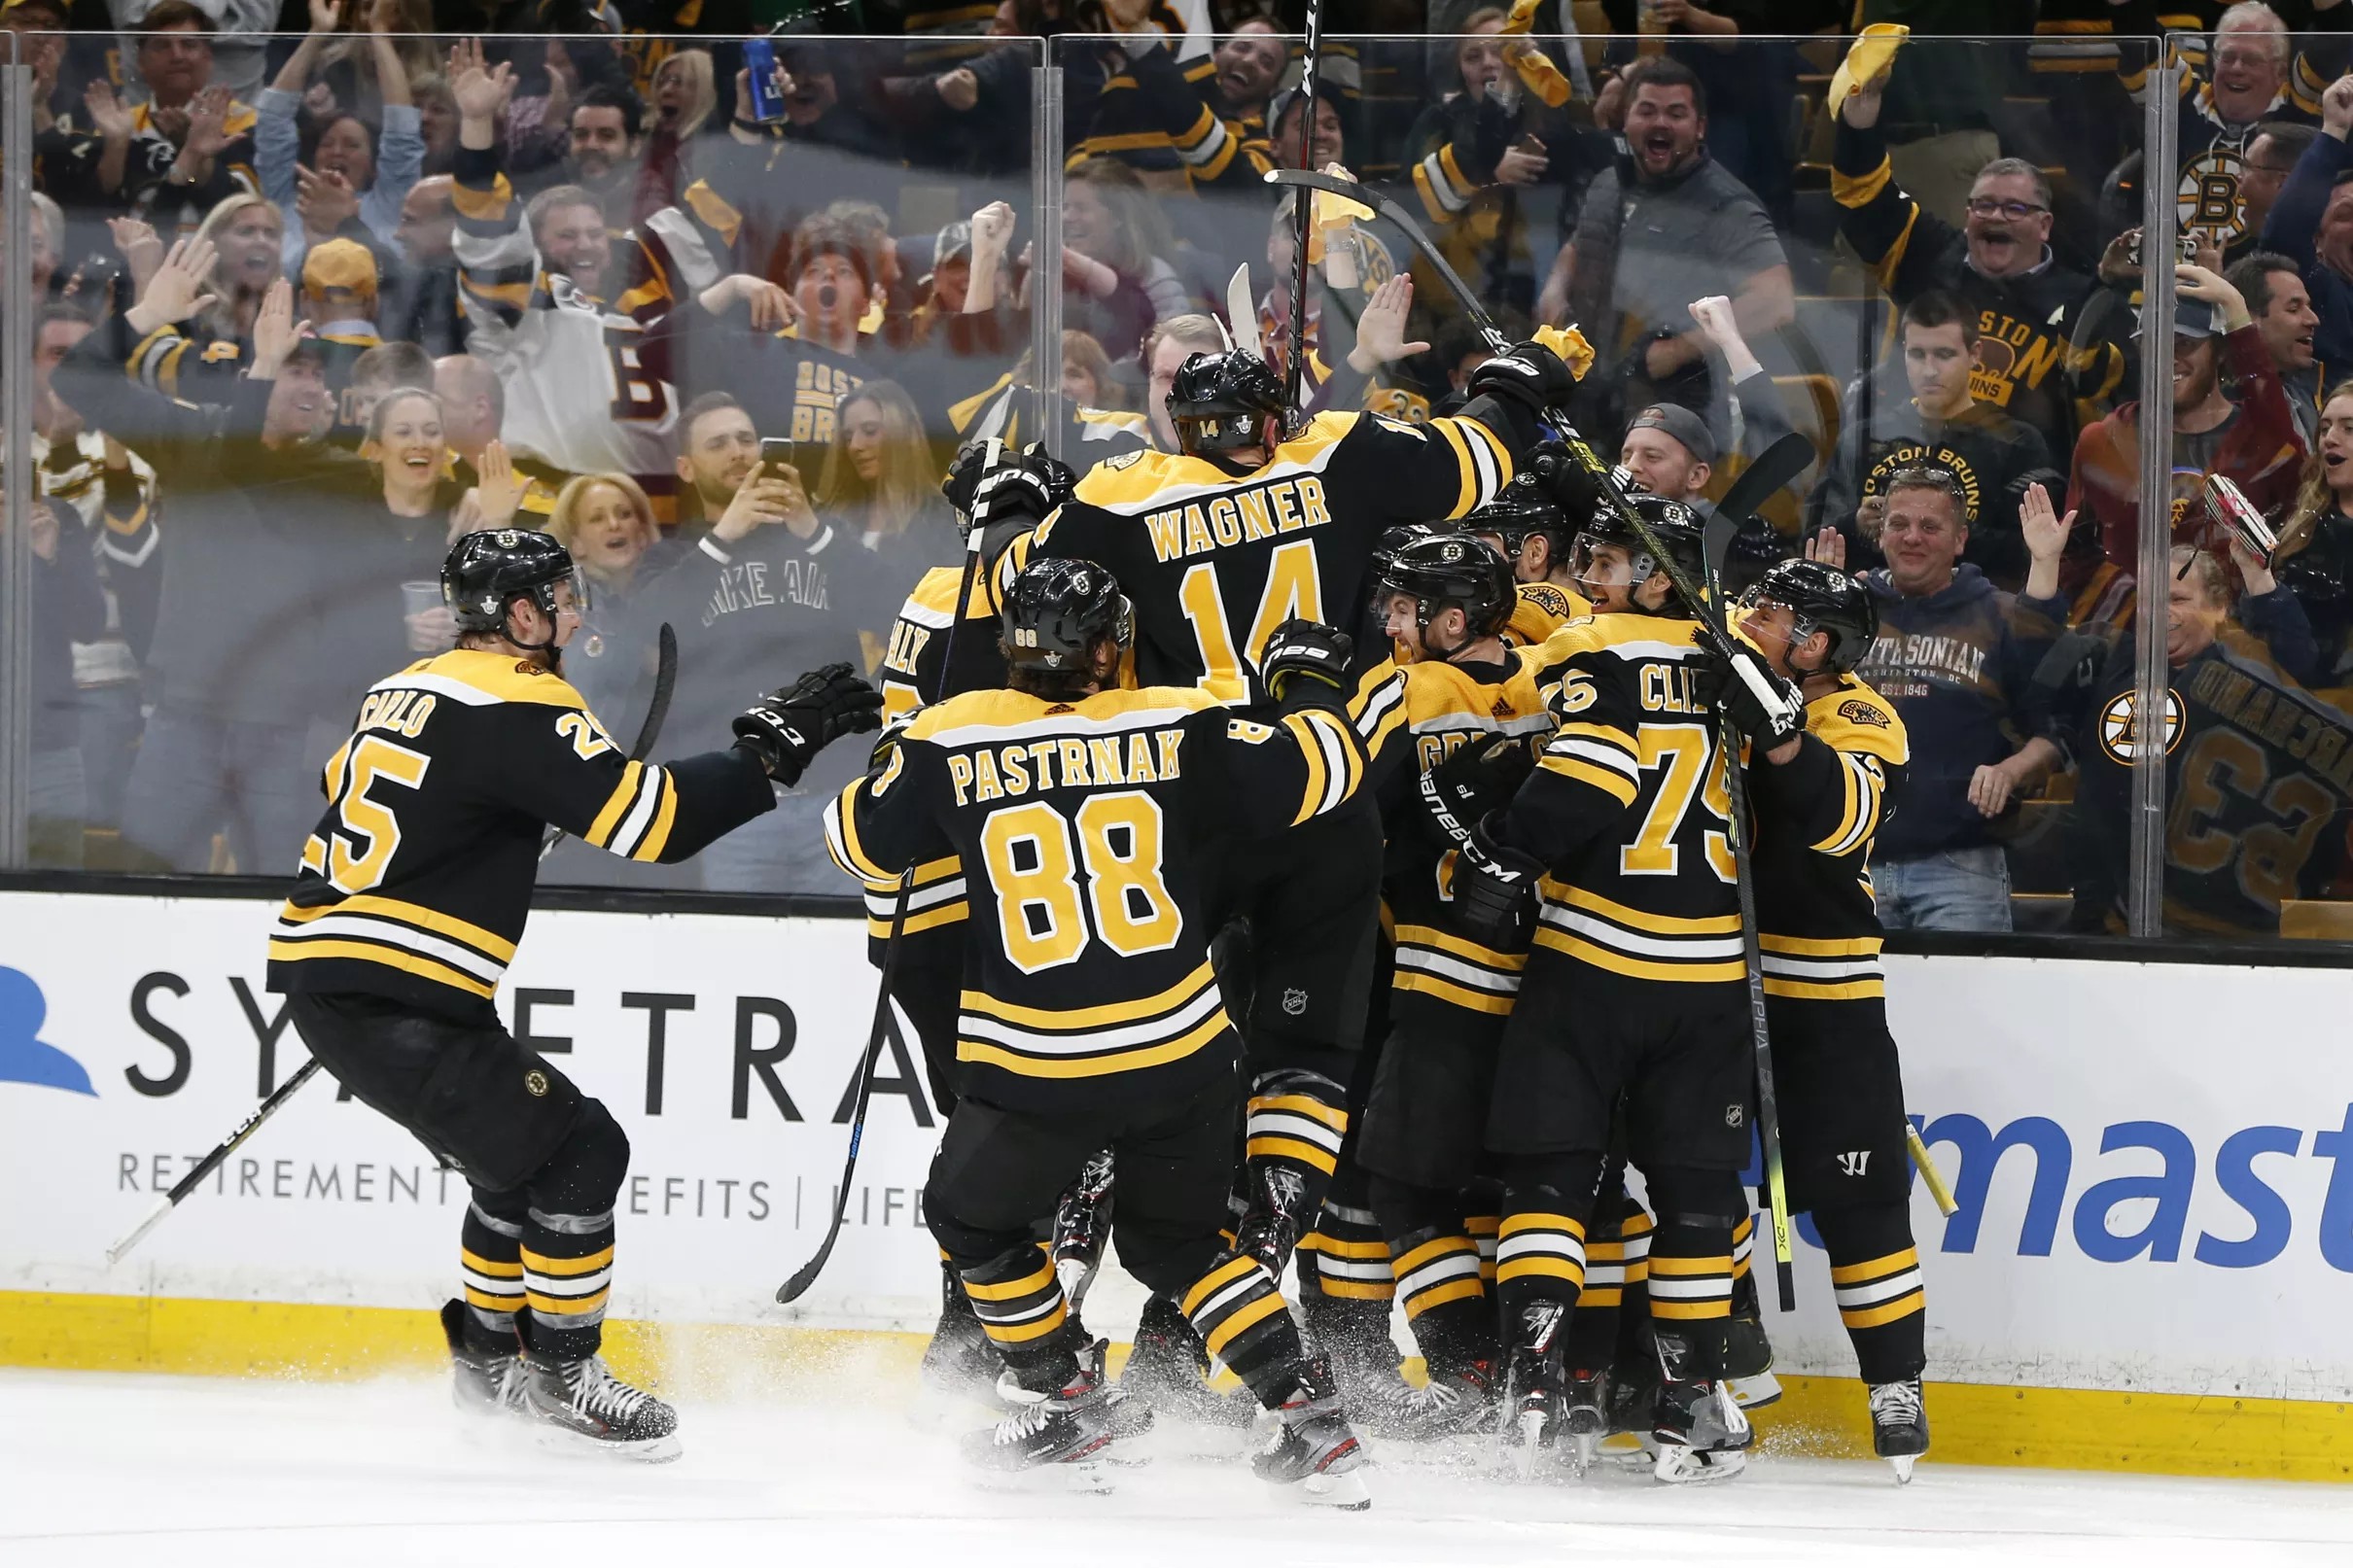 Recap Bruins start strong, recover late to take Game 1 over Columbus